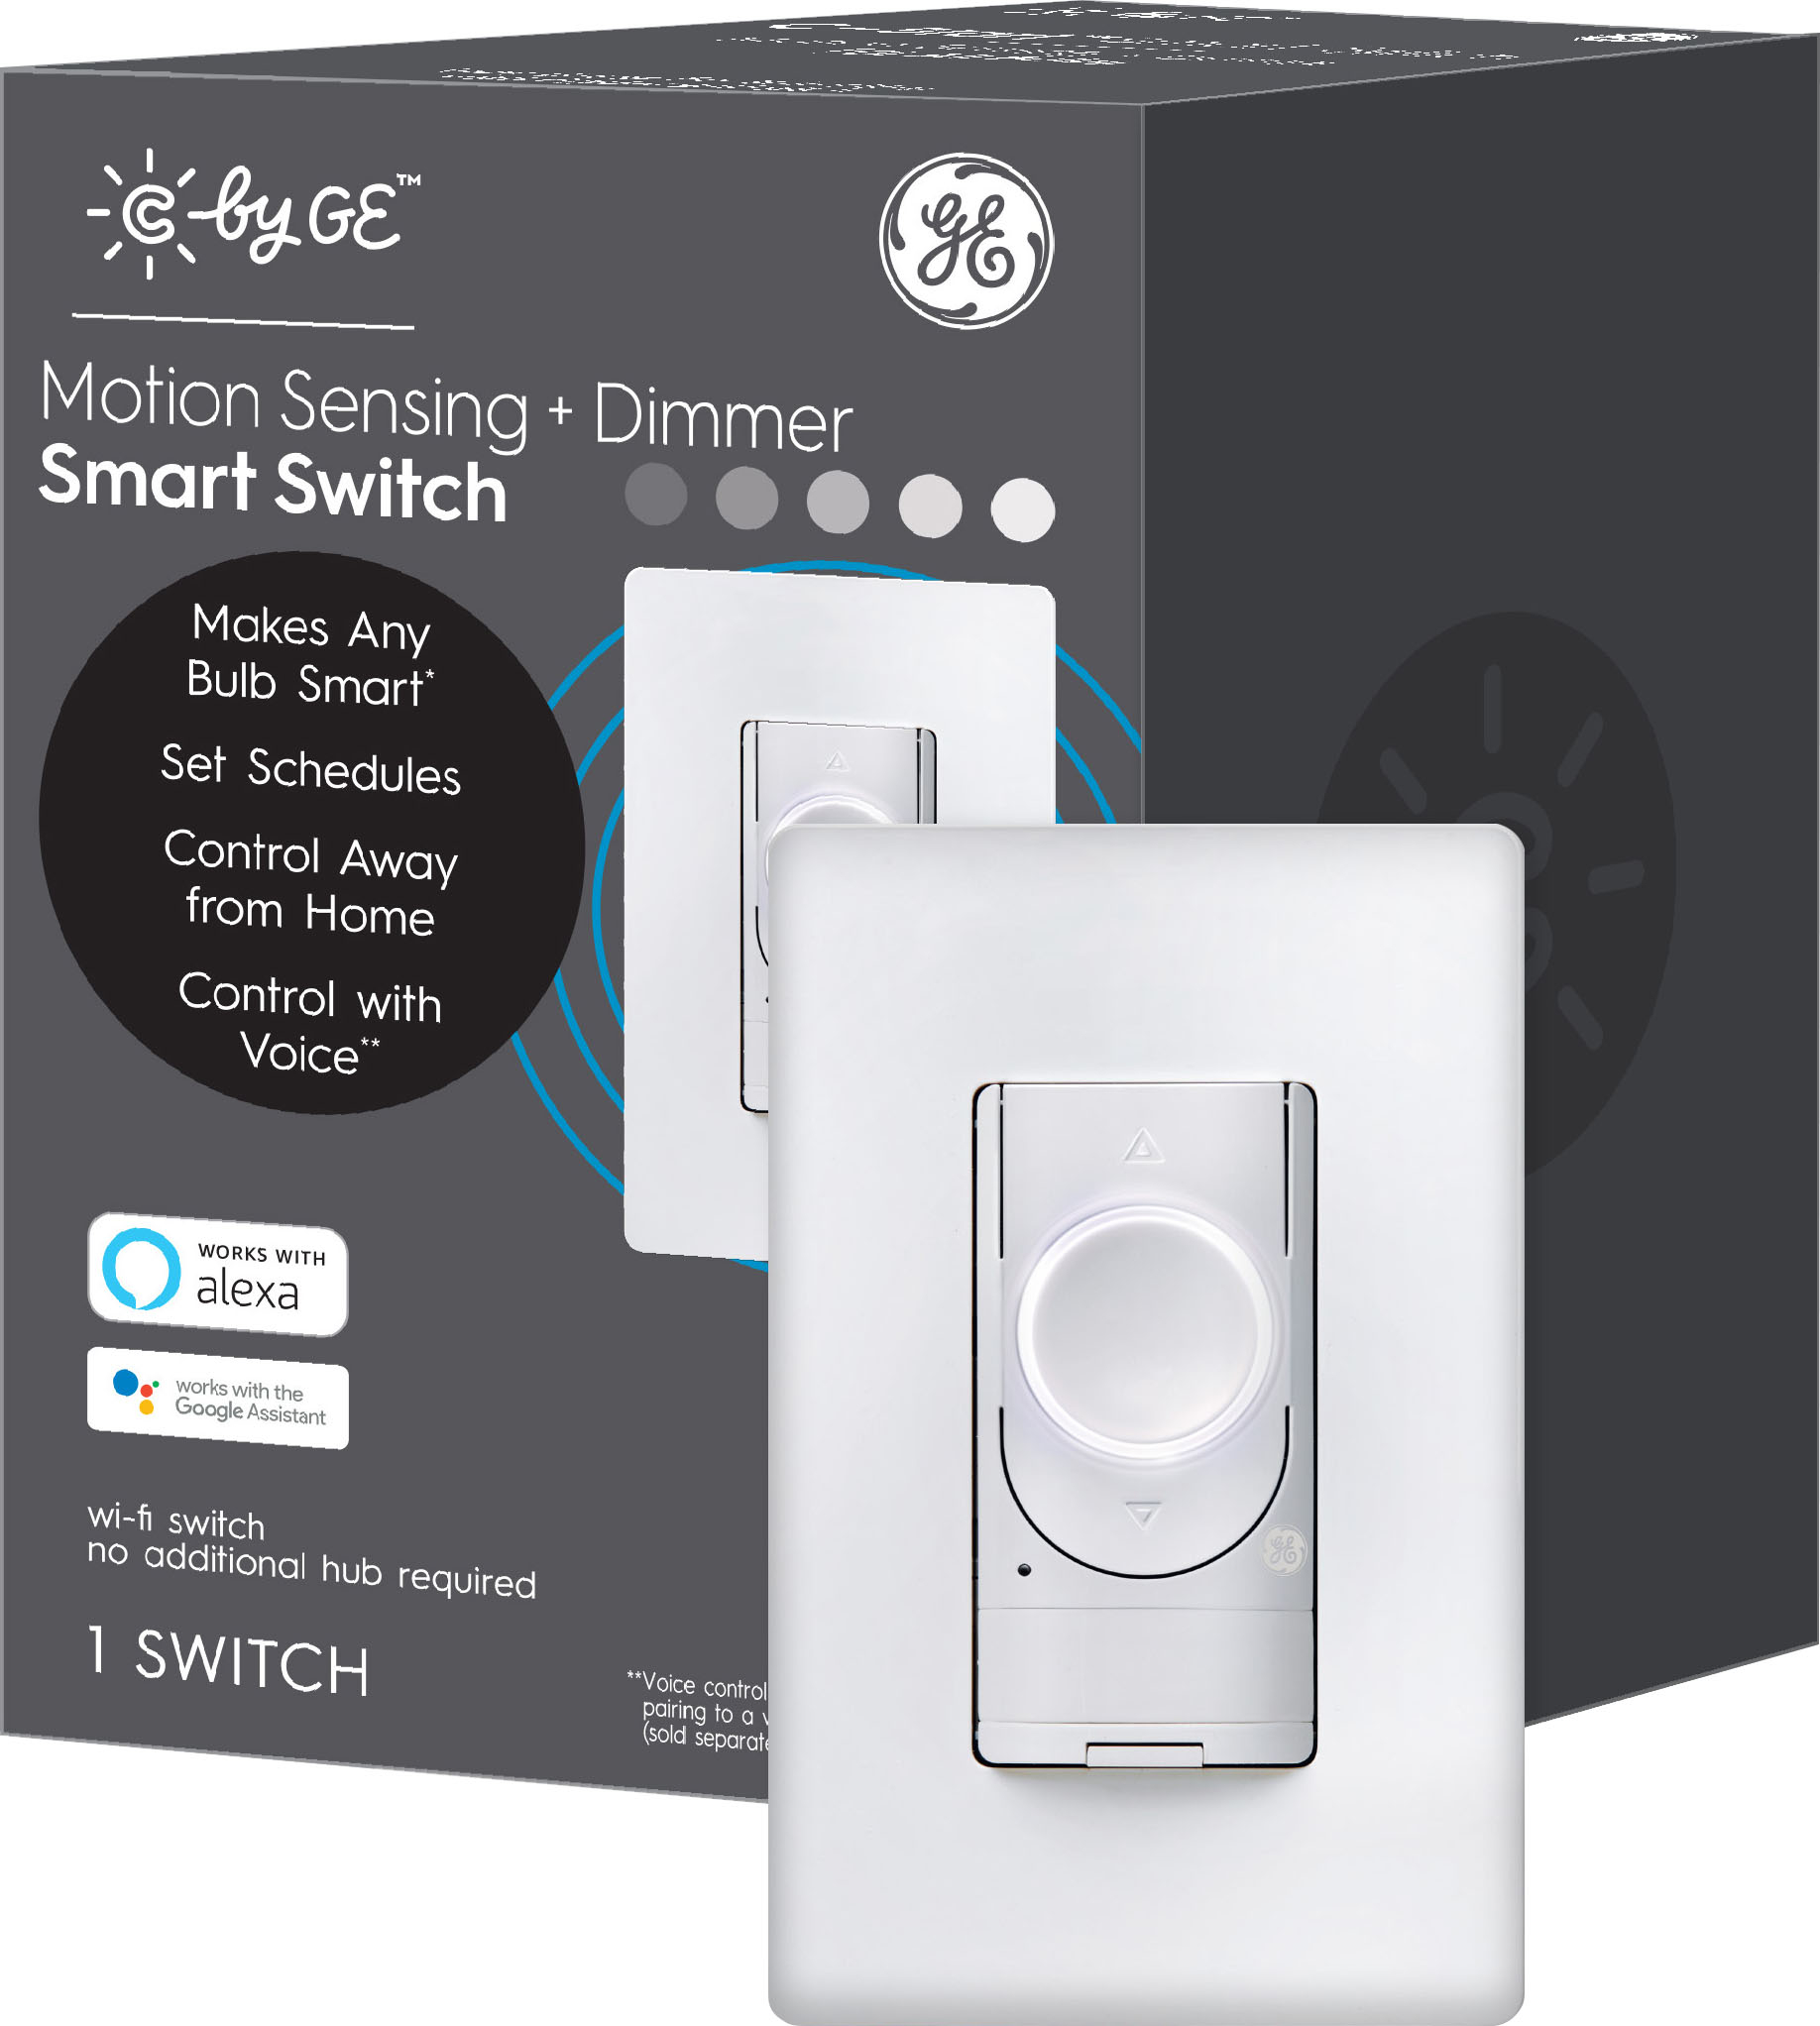 evenaar bolvormig getuige GE CYNC Dimmer + Motion Sensor Smart Switch, Neutral Wire Required,  Bluetooth and 2.4 GHz Wifi (Packaging May Vary) White 48733 - Best Buy